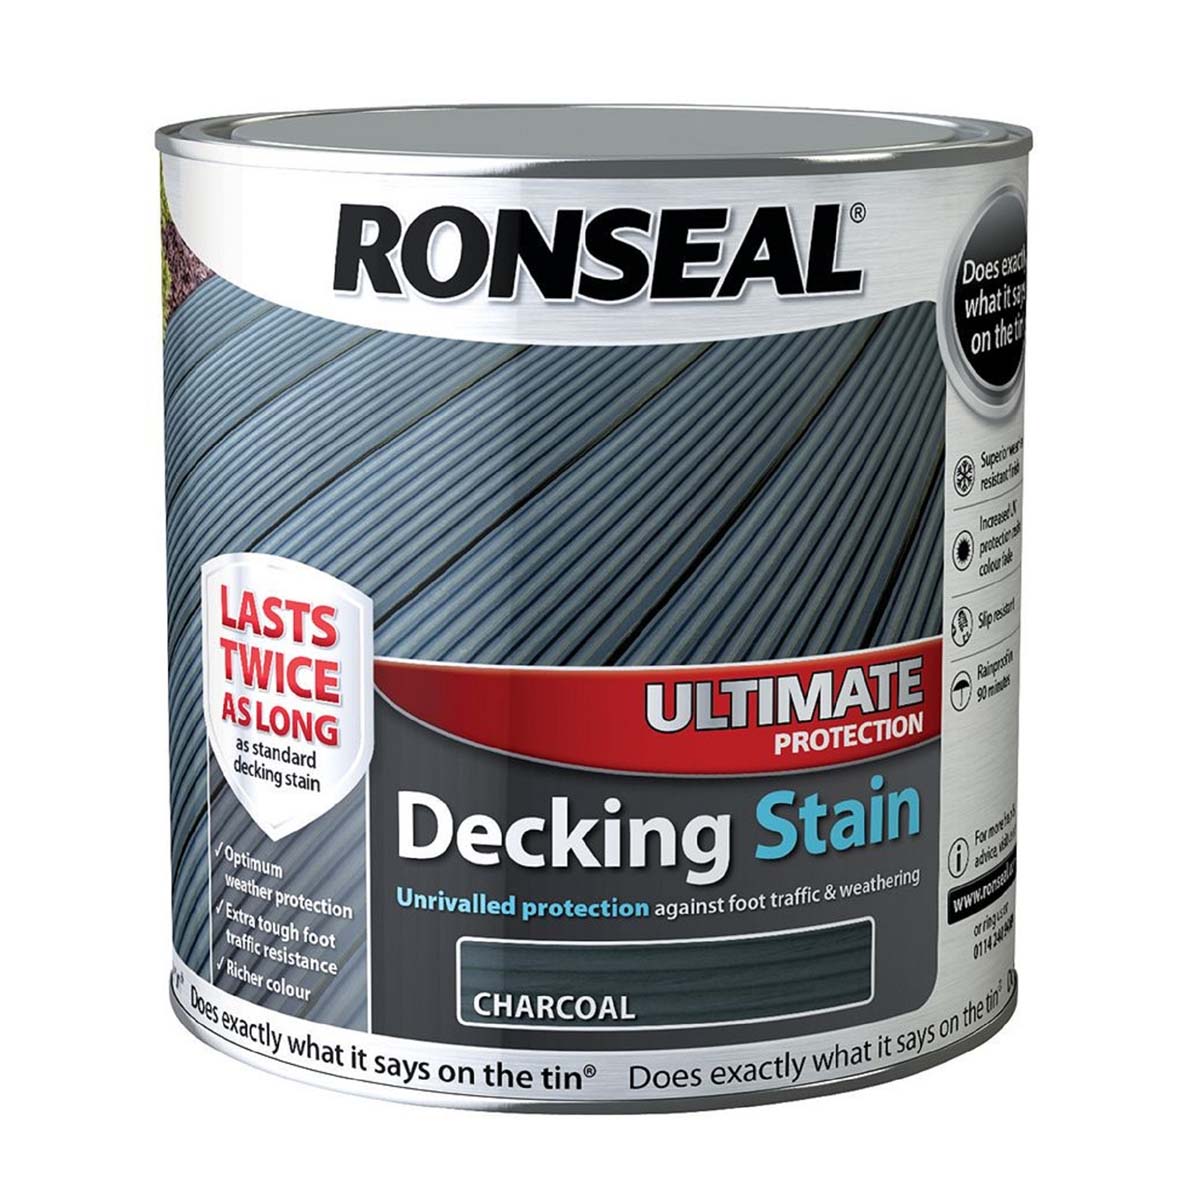 Ronseal Ultimate Protection Decking Stain Charcoal 2.5L (36912)